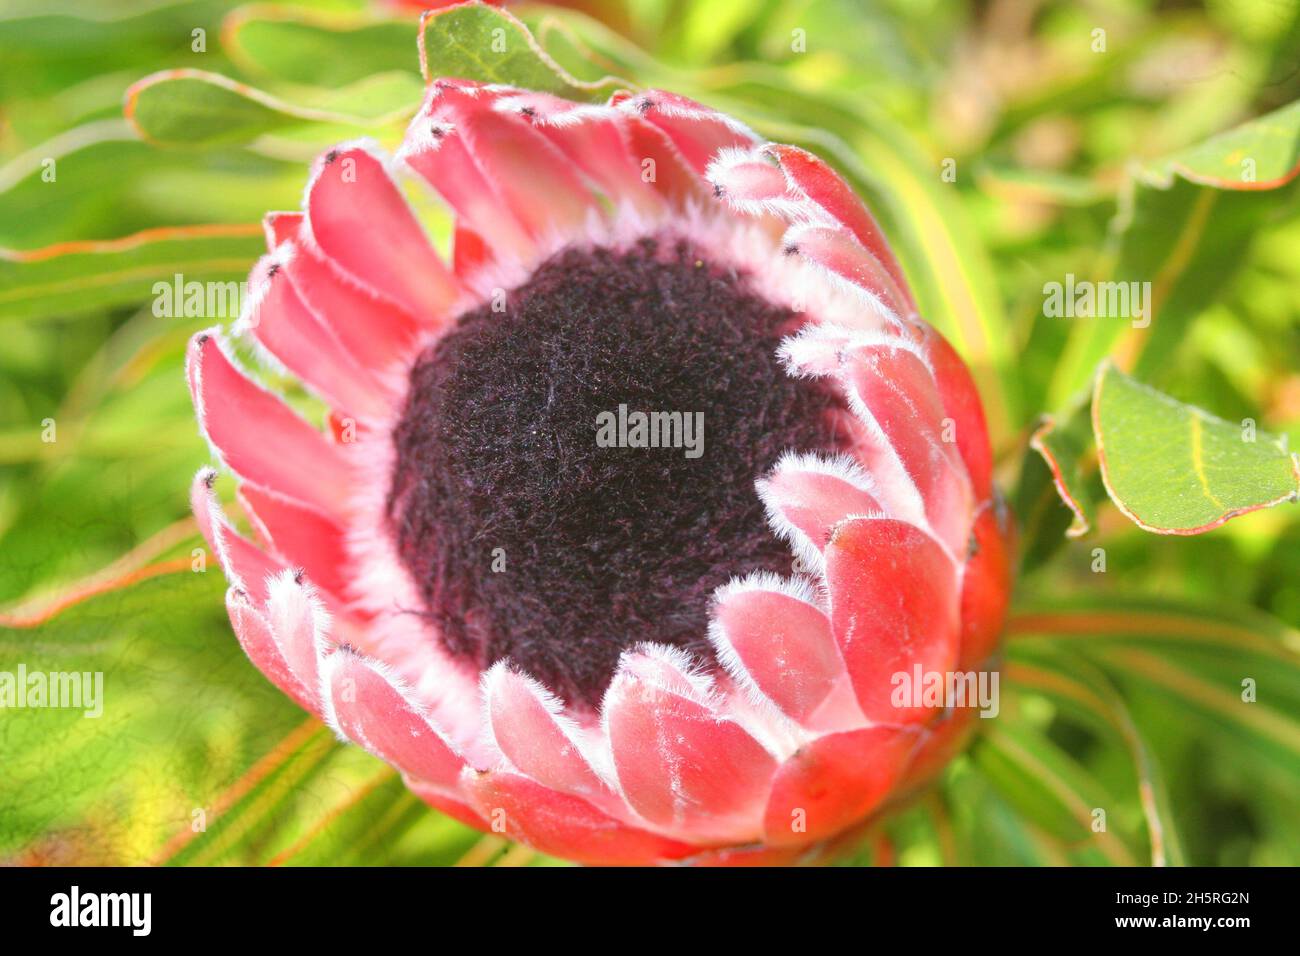 Tresco Abbey Gardens: Bright pink Protea bracts, white hairs shining, and still closed purple flower viewed from above, with green foliage background. Stock Photo